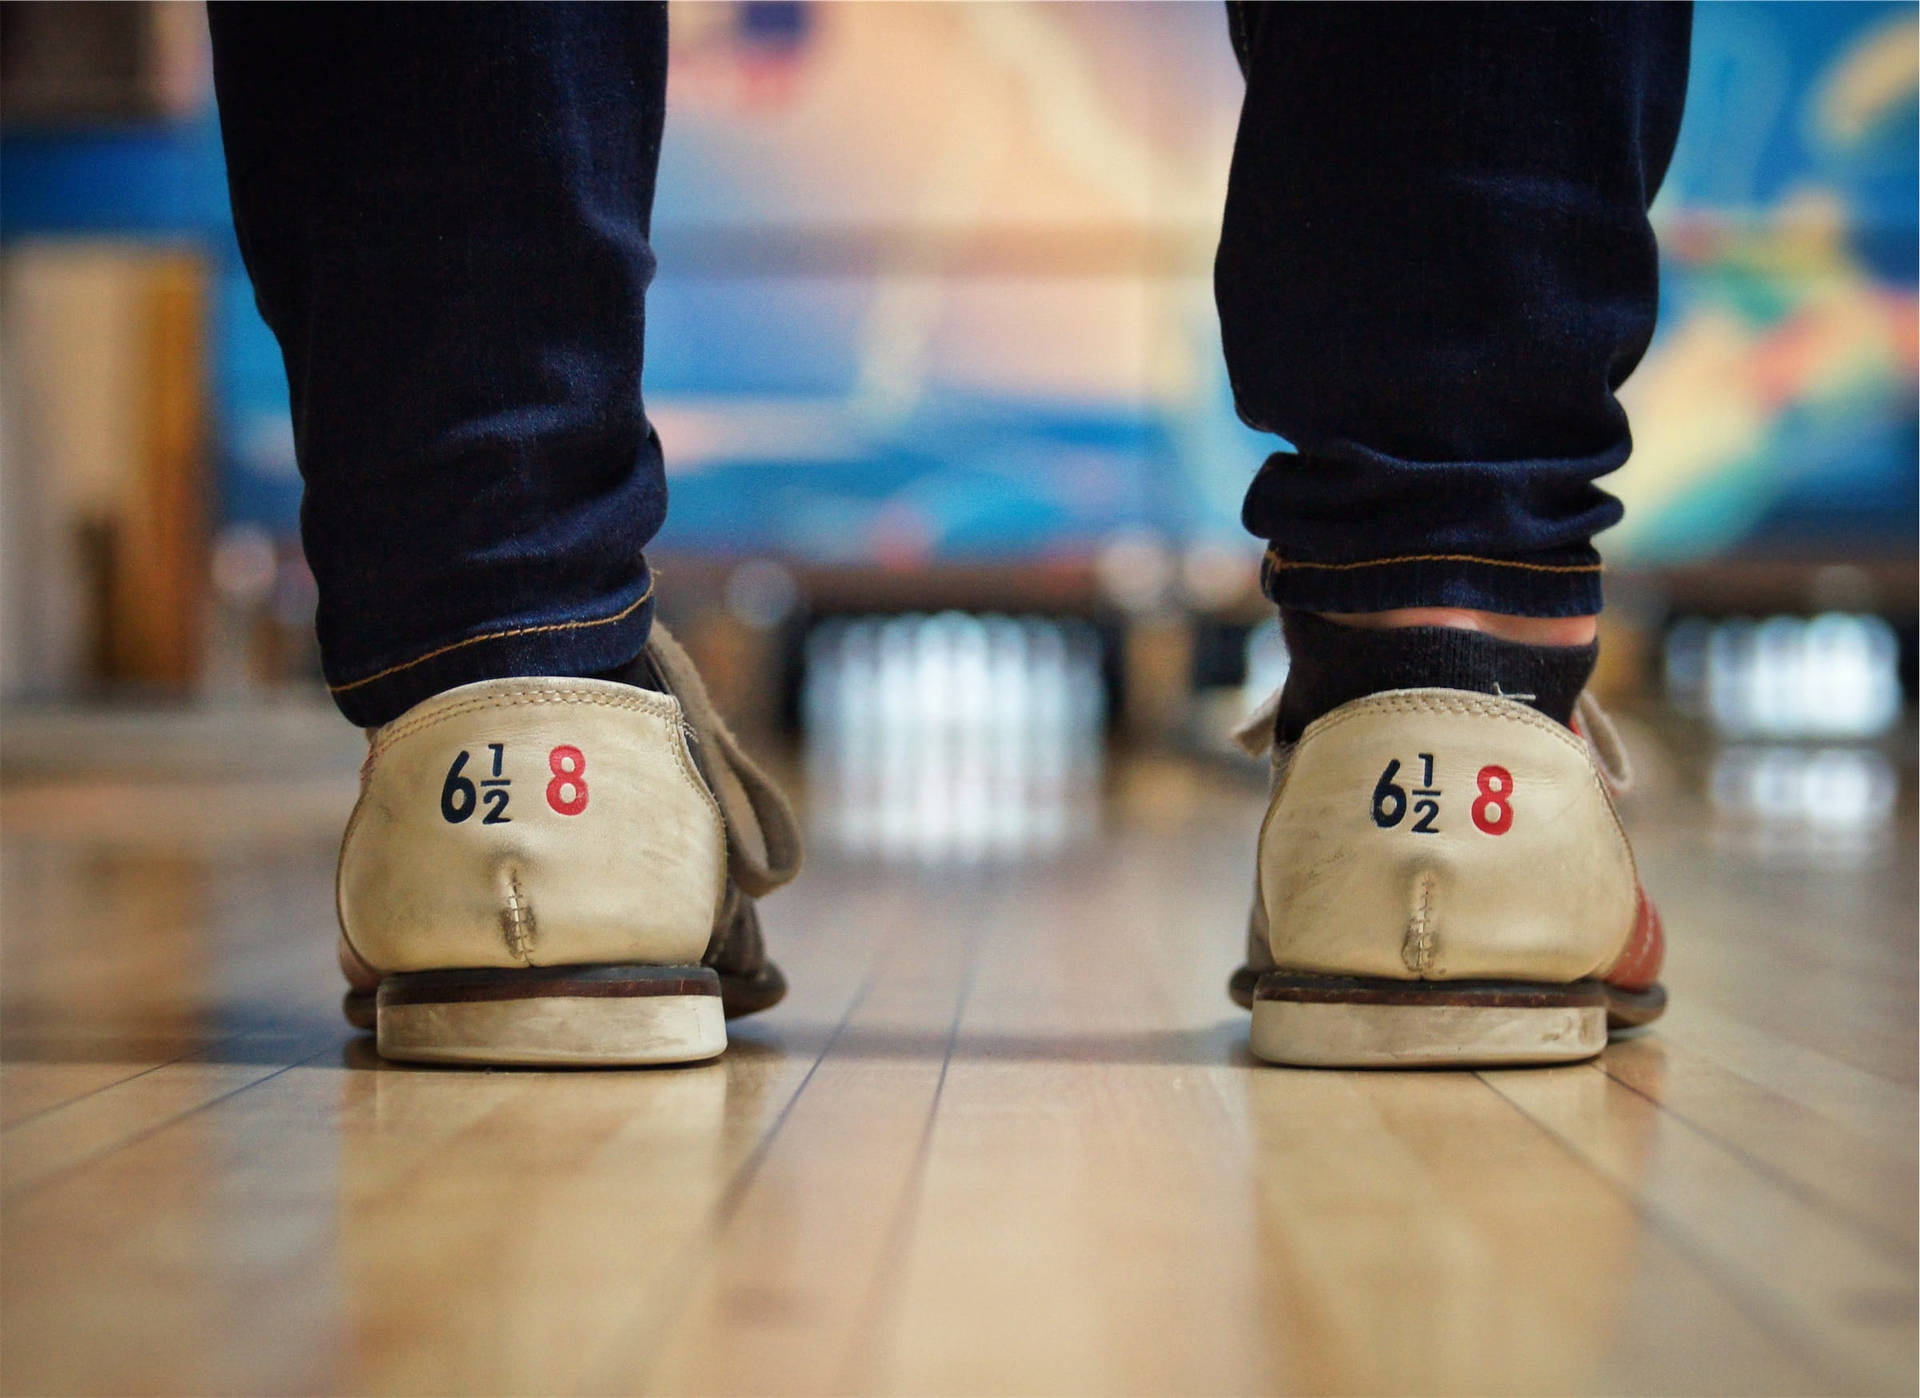 A Pair Of Bowling Shoes On The Floor Background